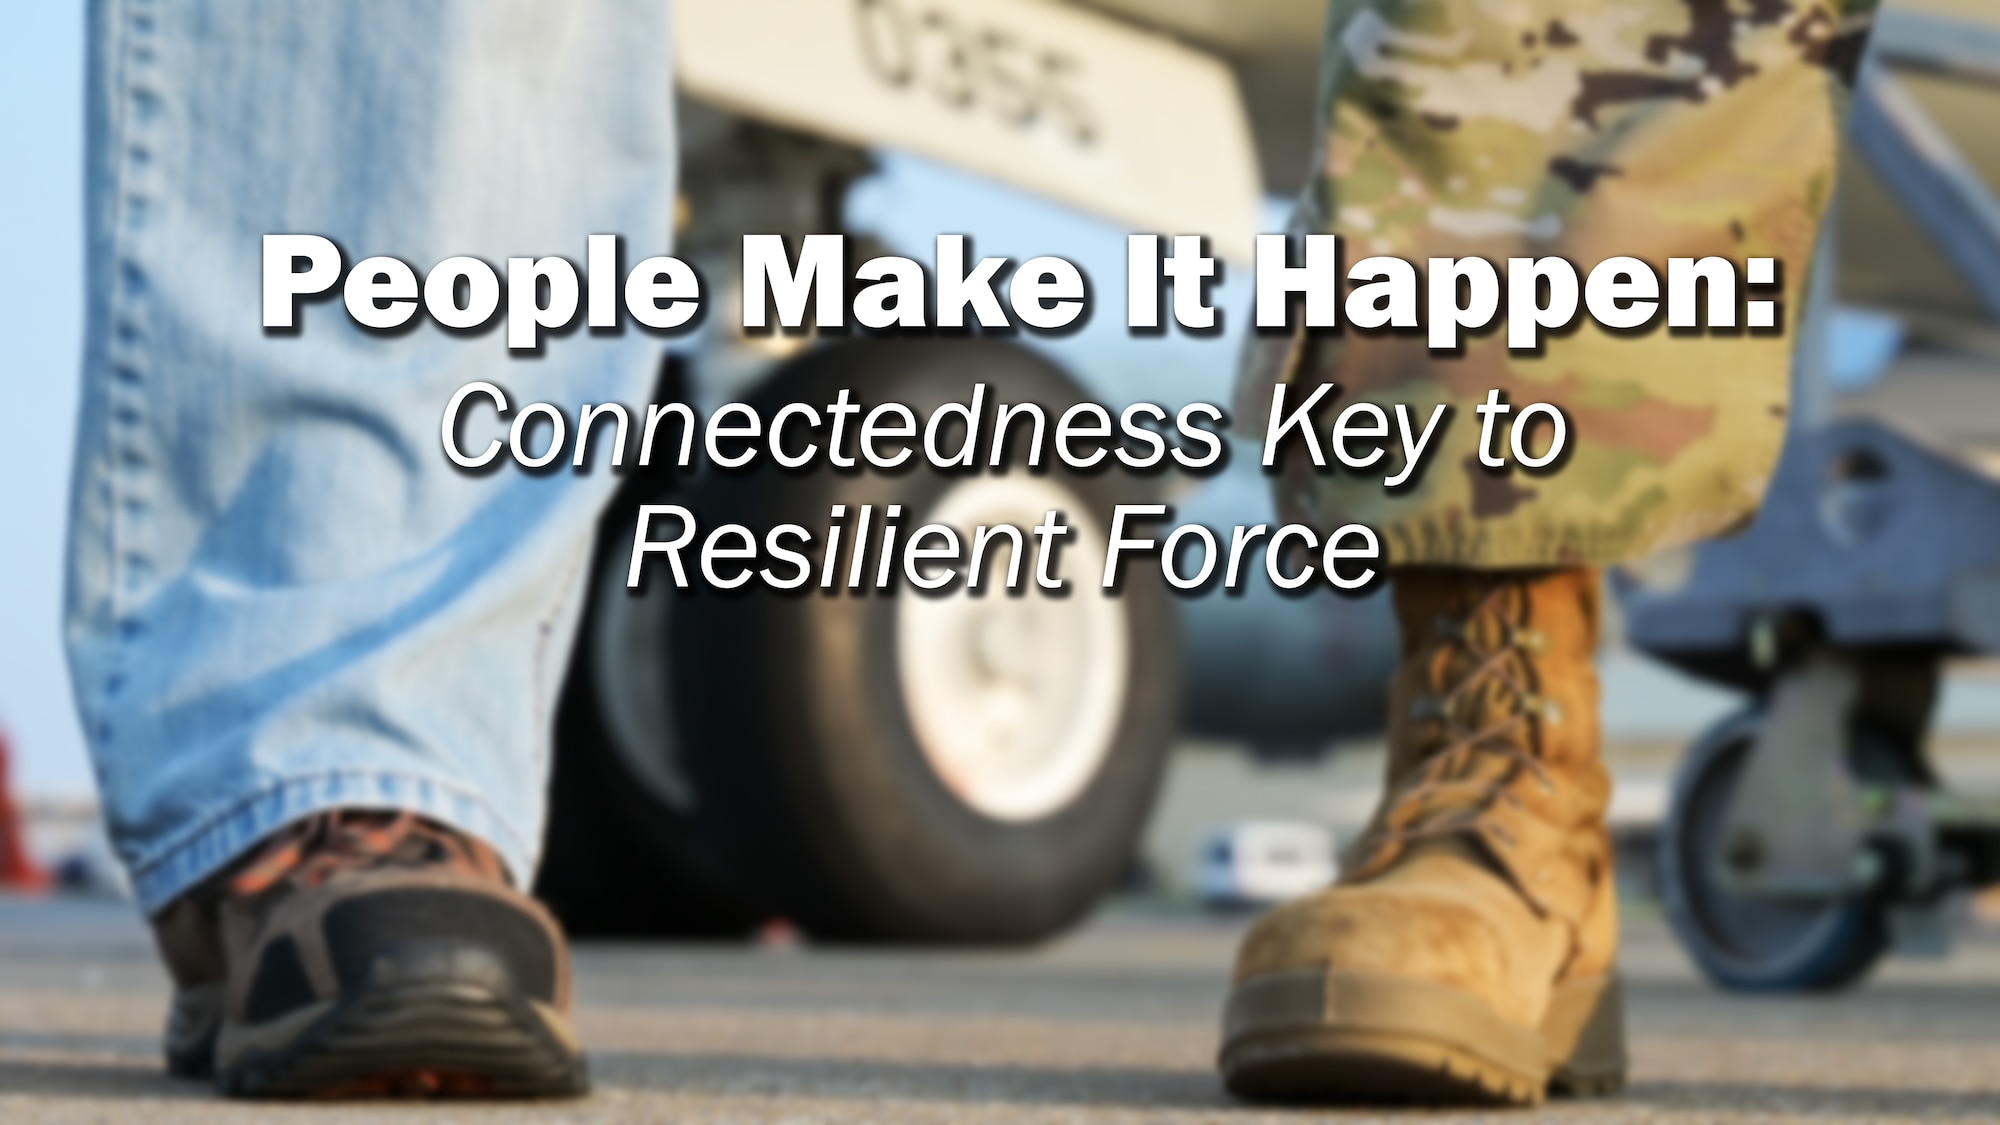 People Make it Happen: Connectedness Key to Resilient Force